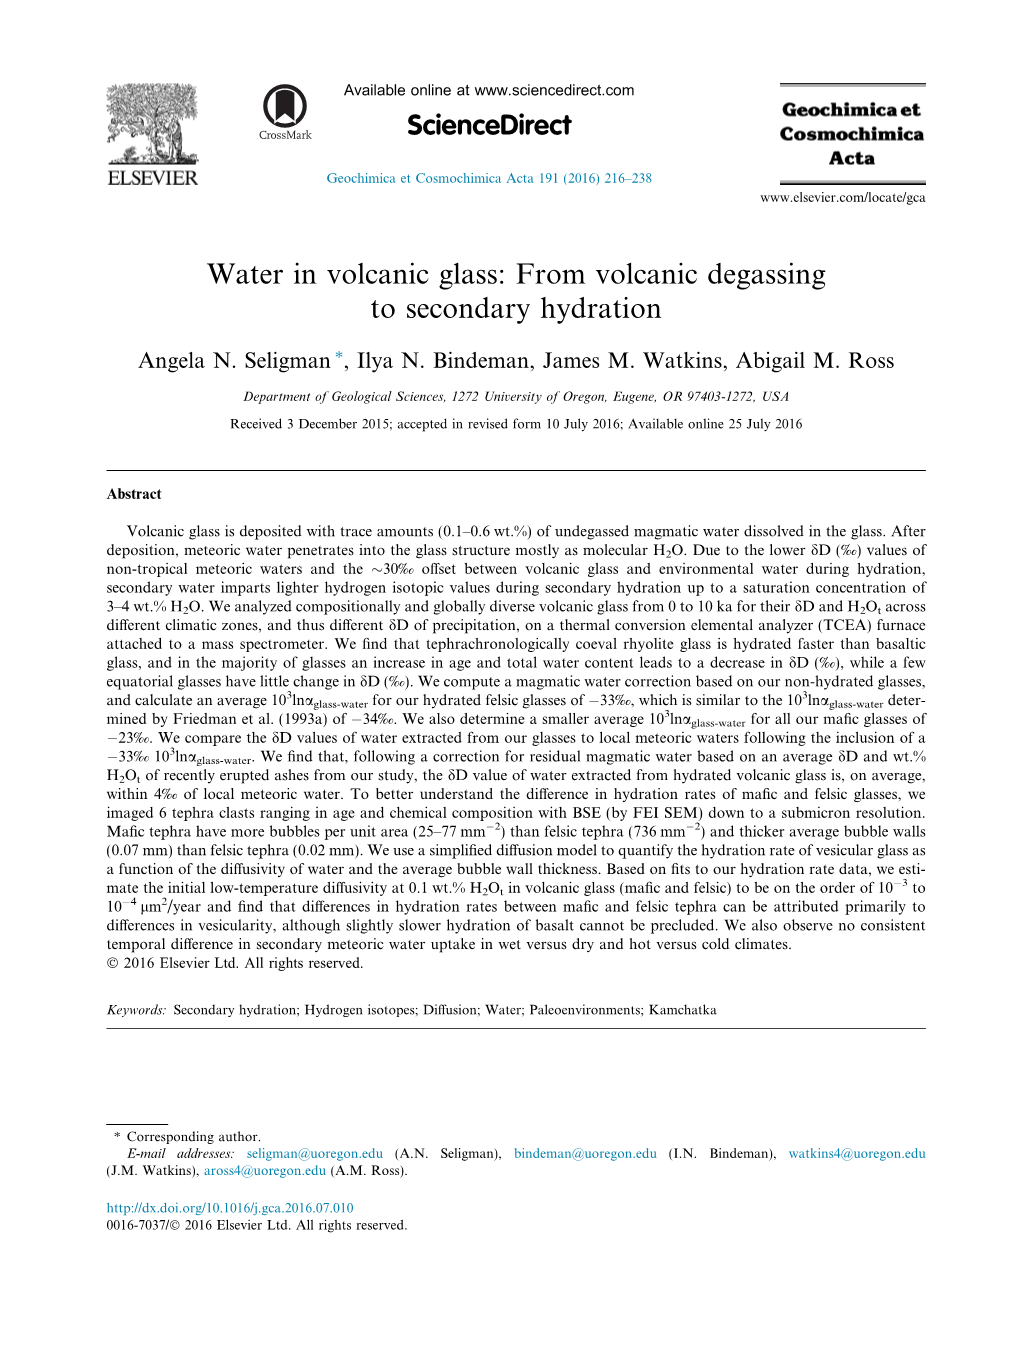 Water in Volcanic Glass: from Volcanic Degassing to Secondary Hydration